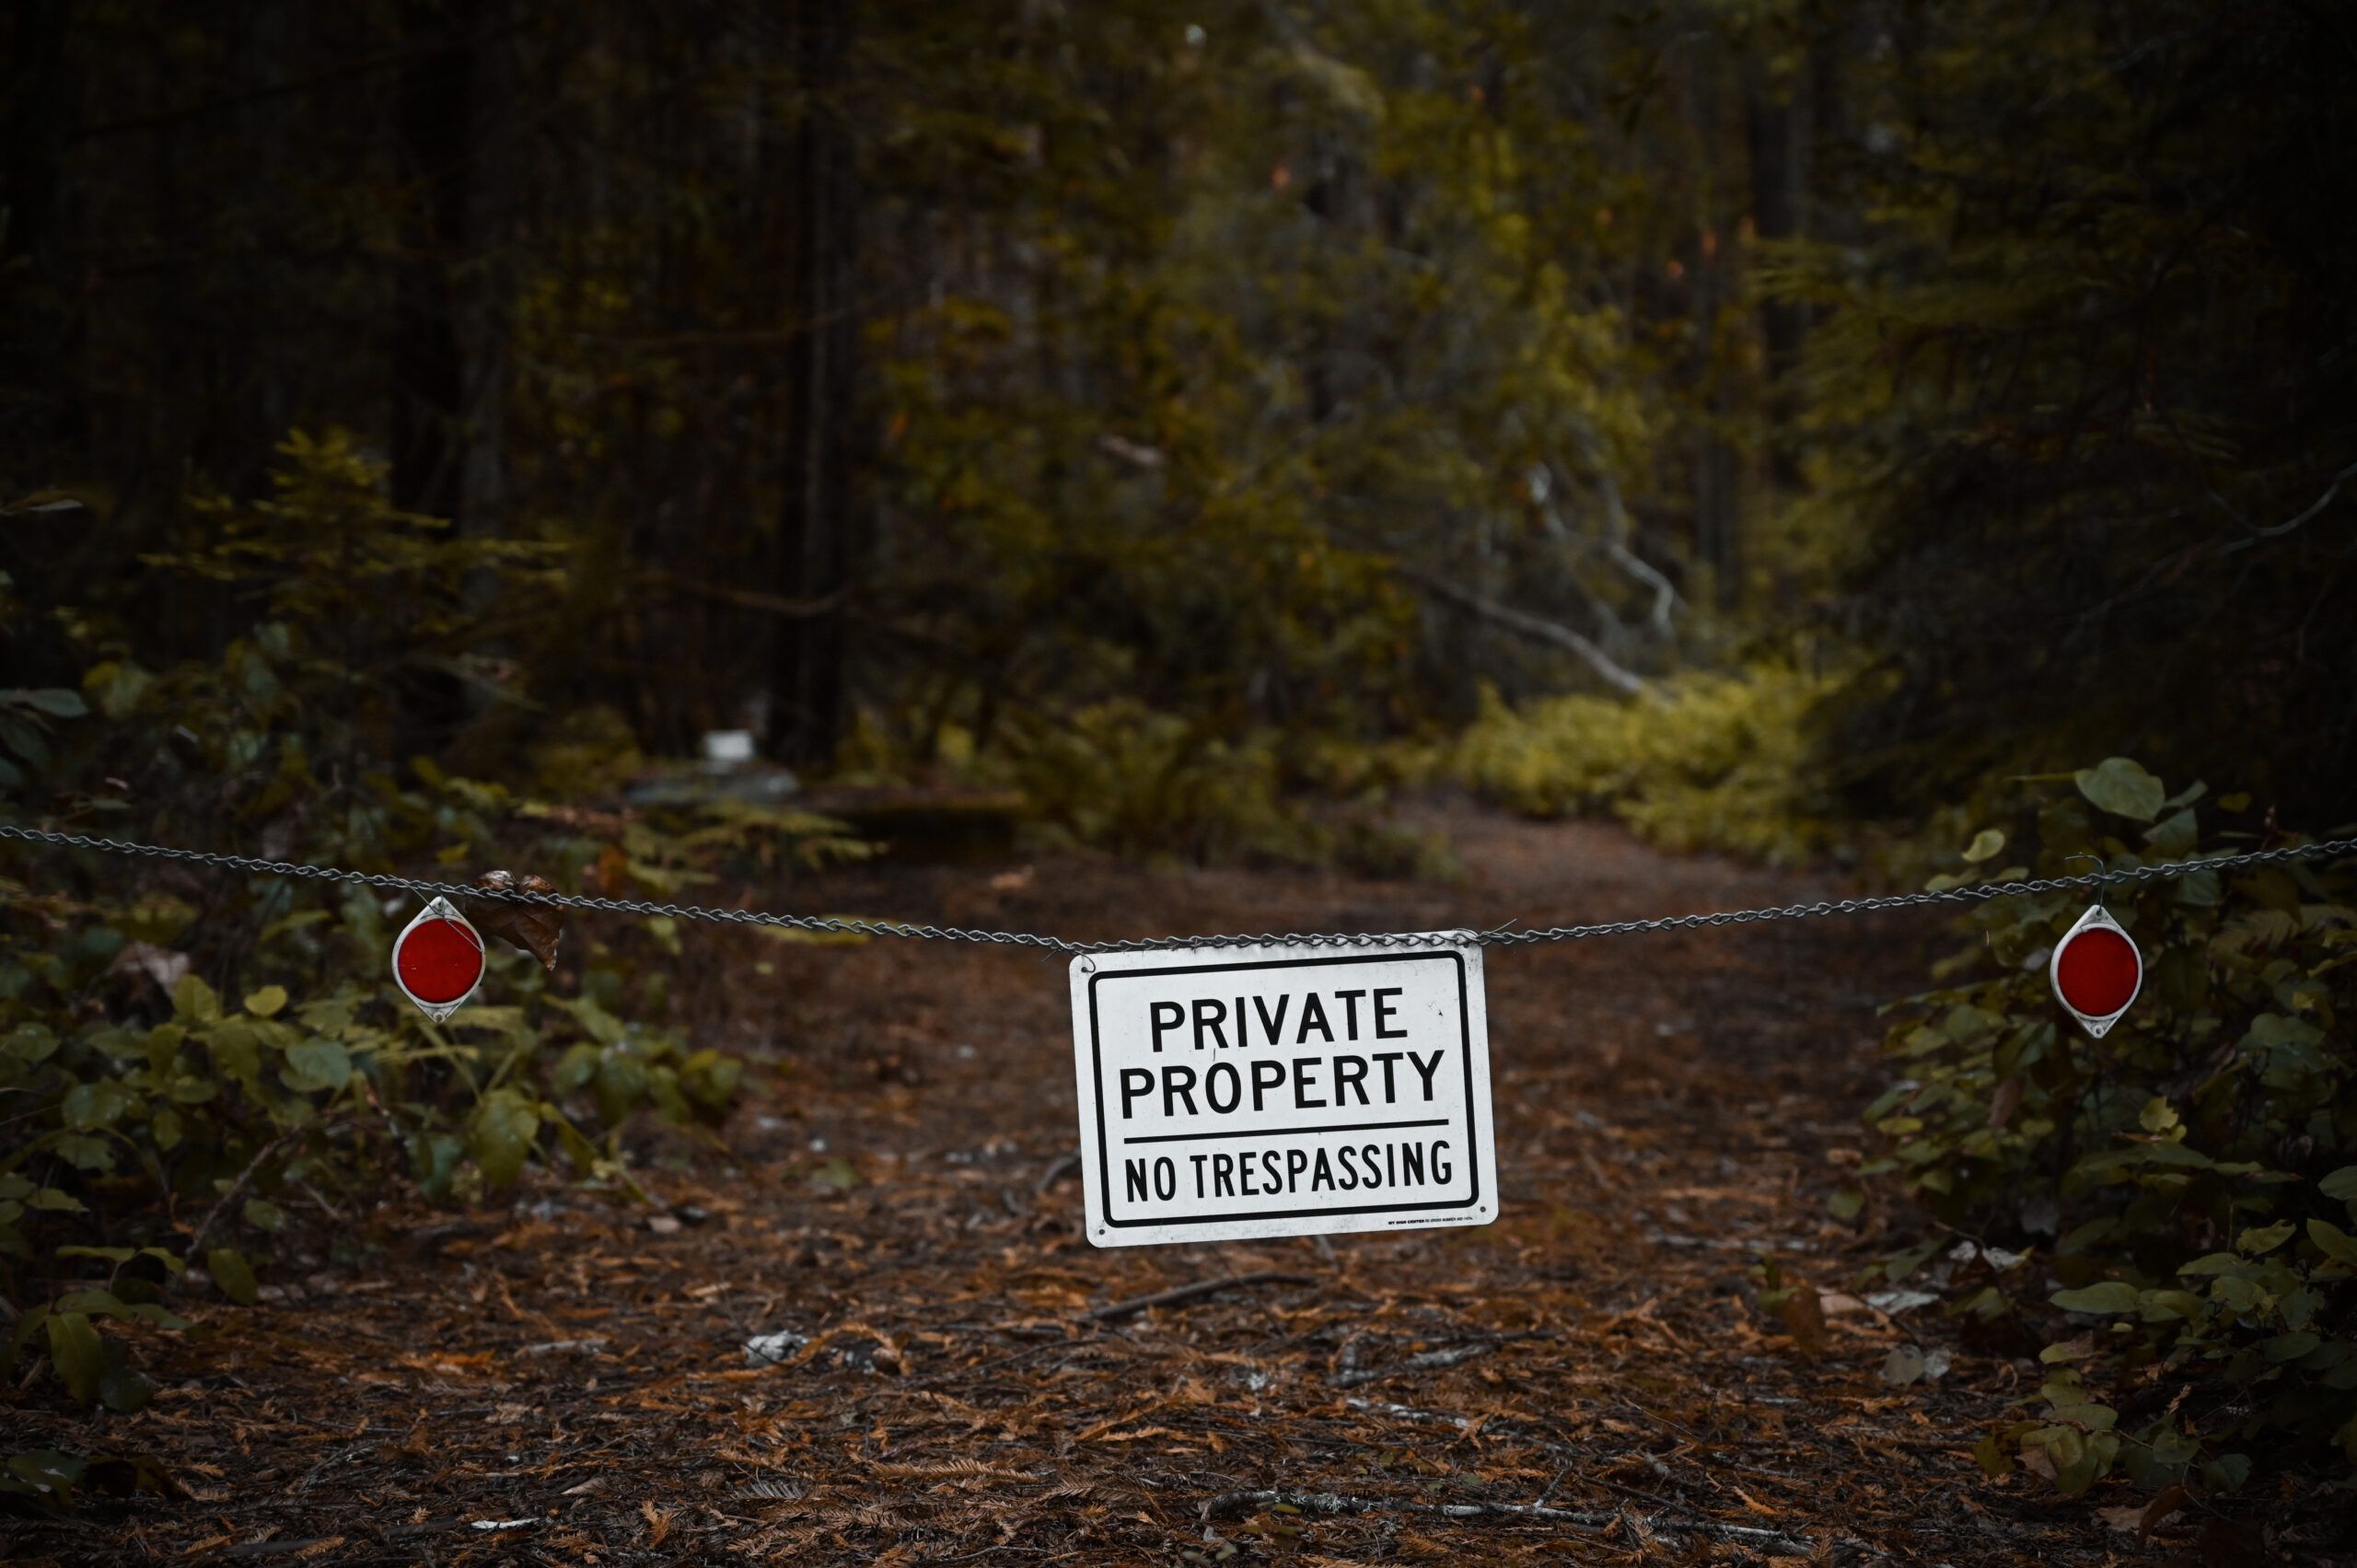 A stock photo of a chain fence stretched across a path, with a sign reading "private property no trespassing" stretched across it.